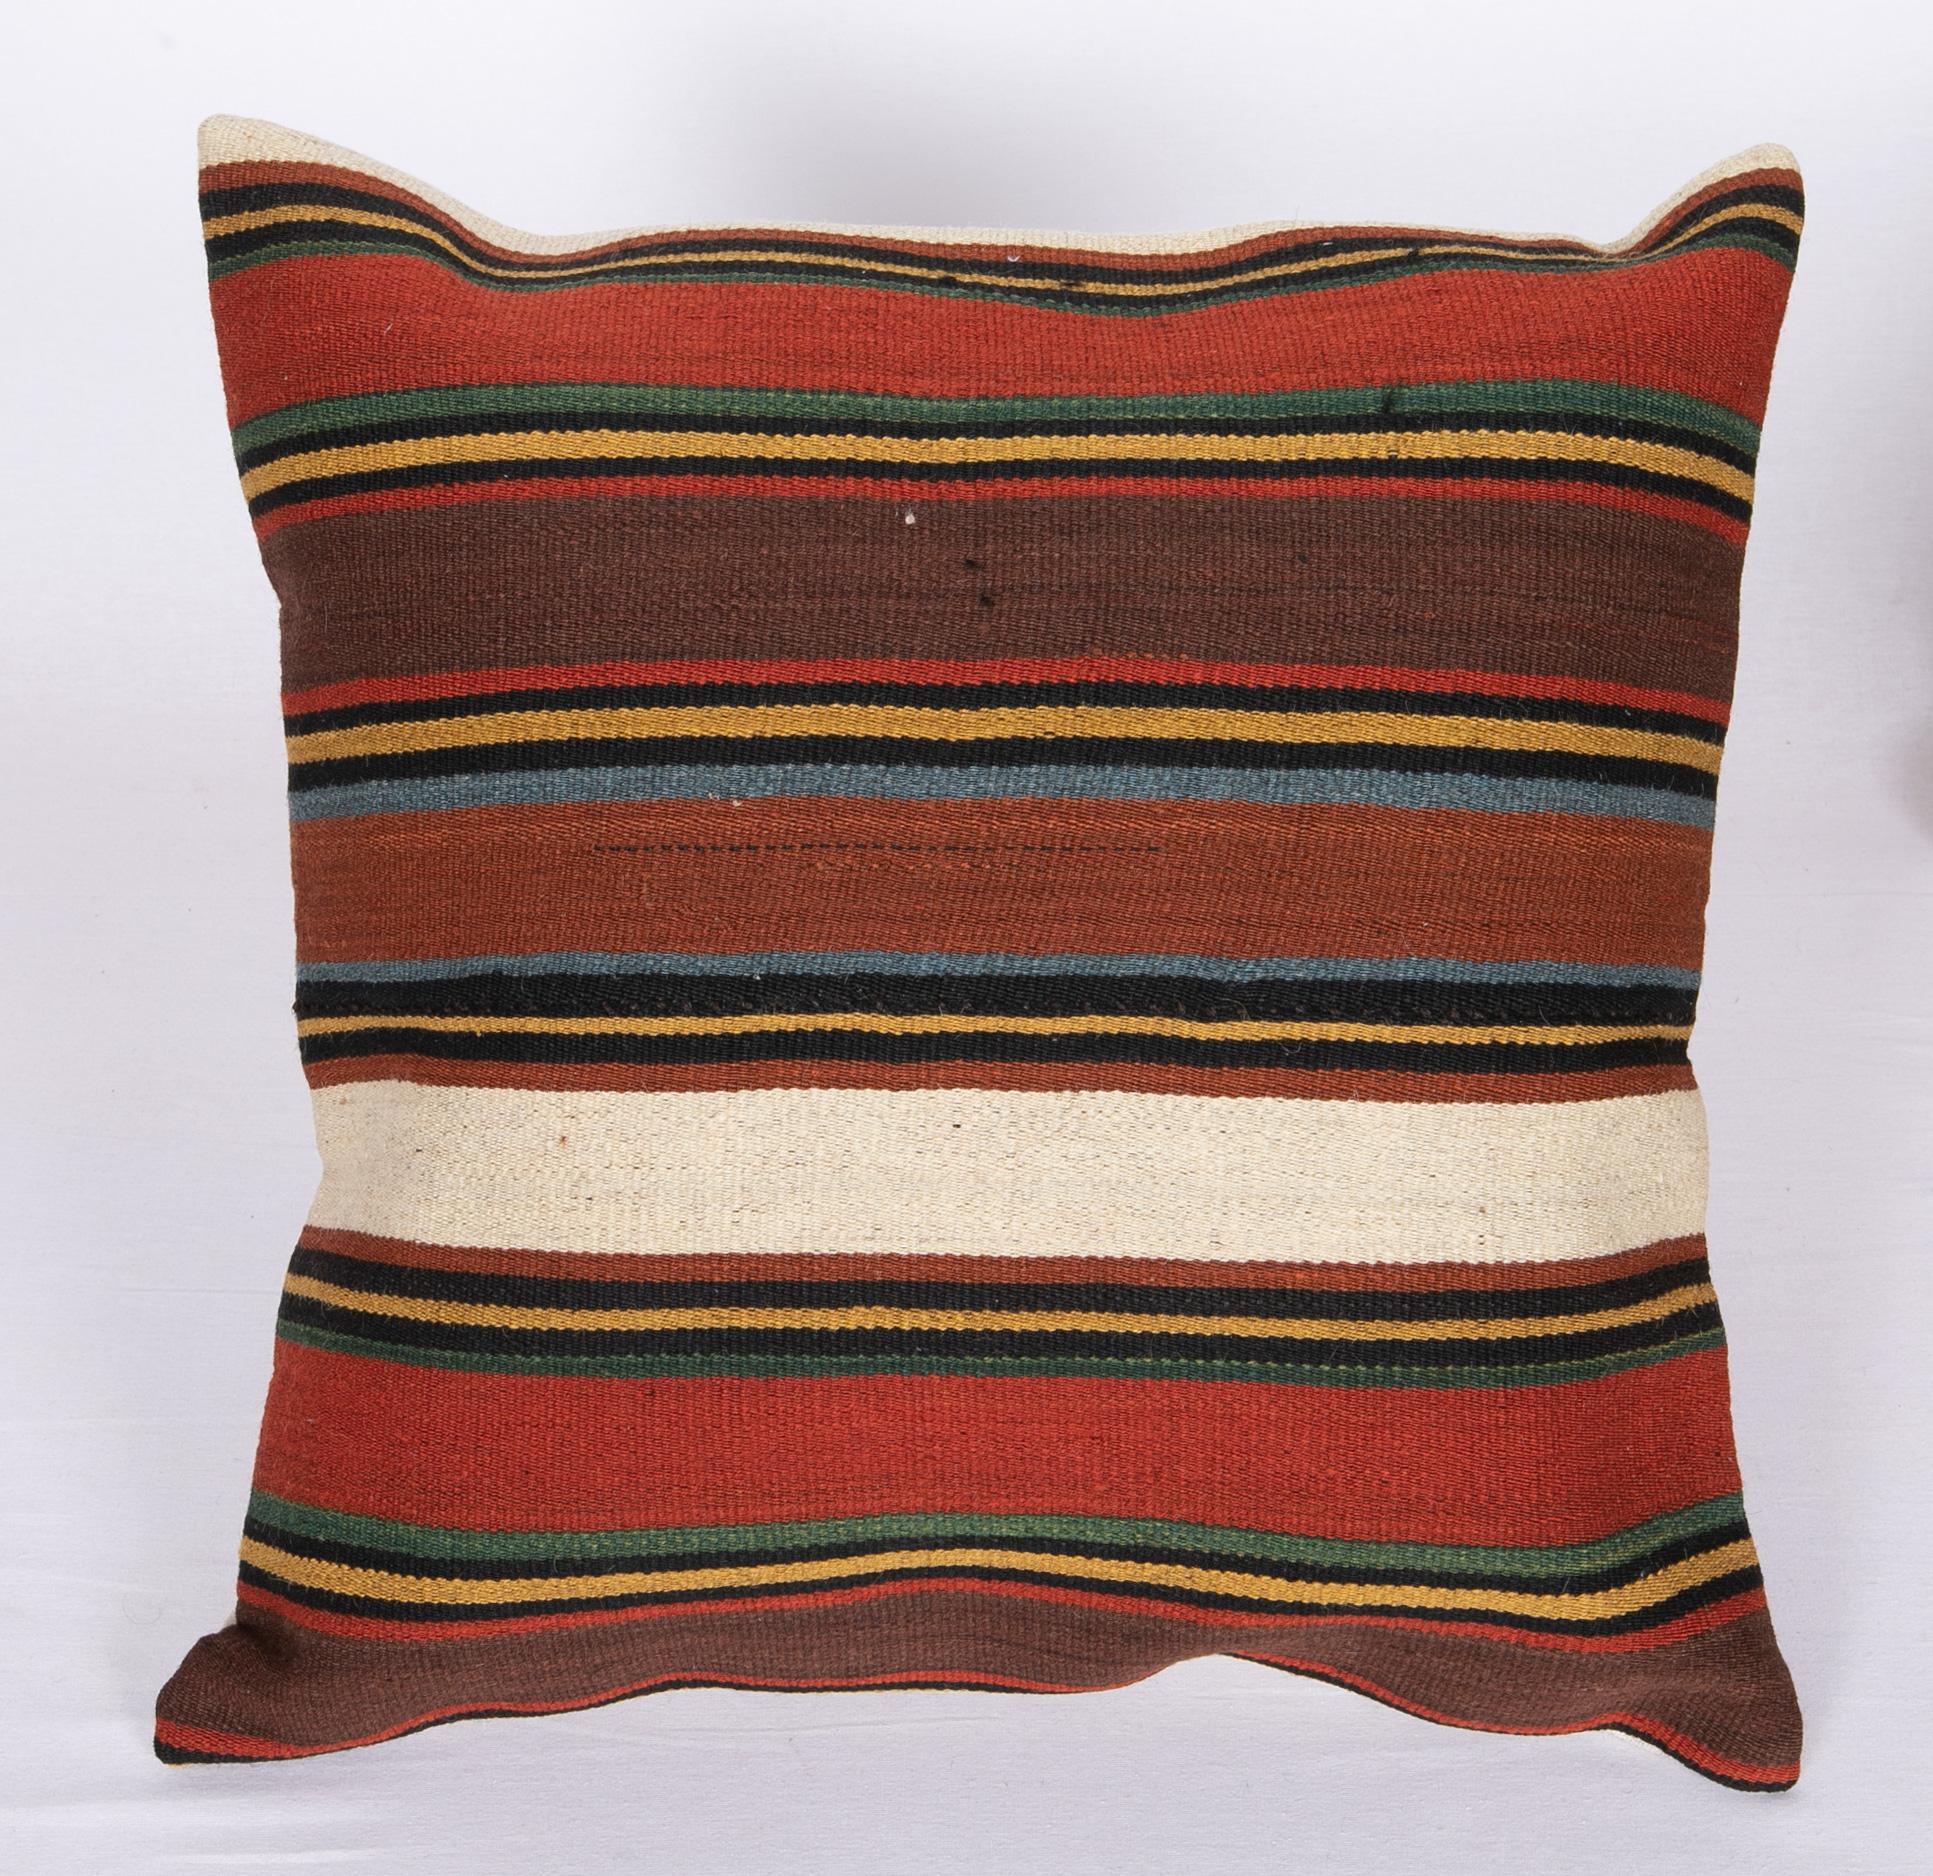 Azerbaijani Antique Pillow Cases Made from a South Caucasian Kilim, Late 19th C